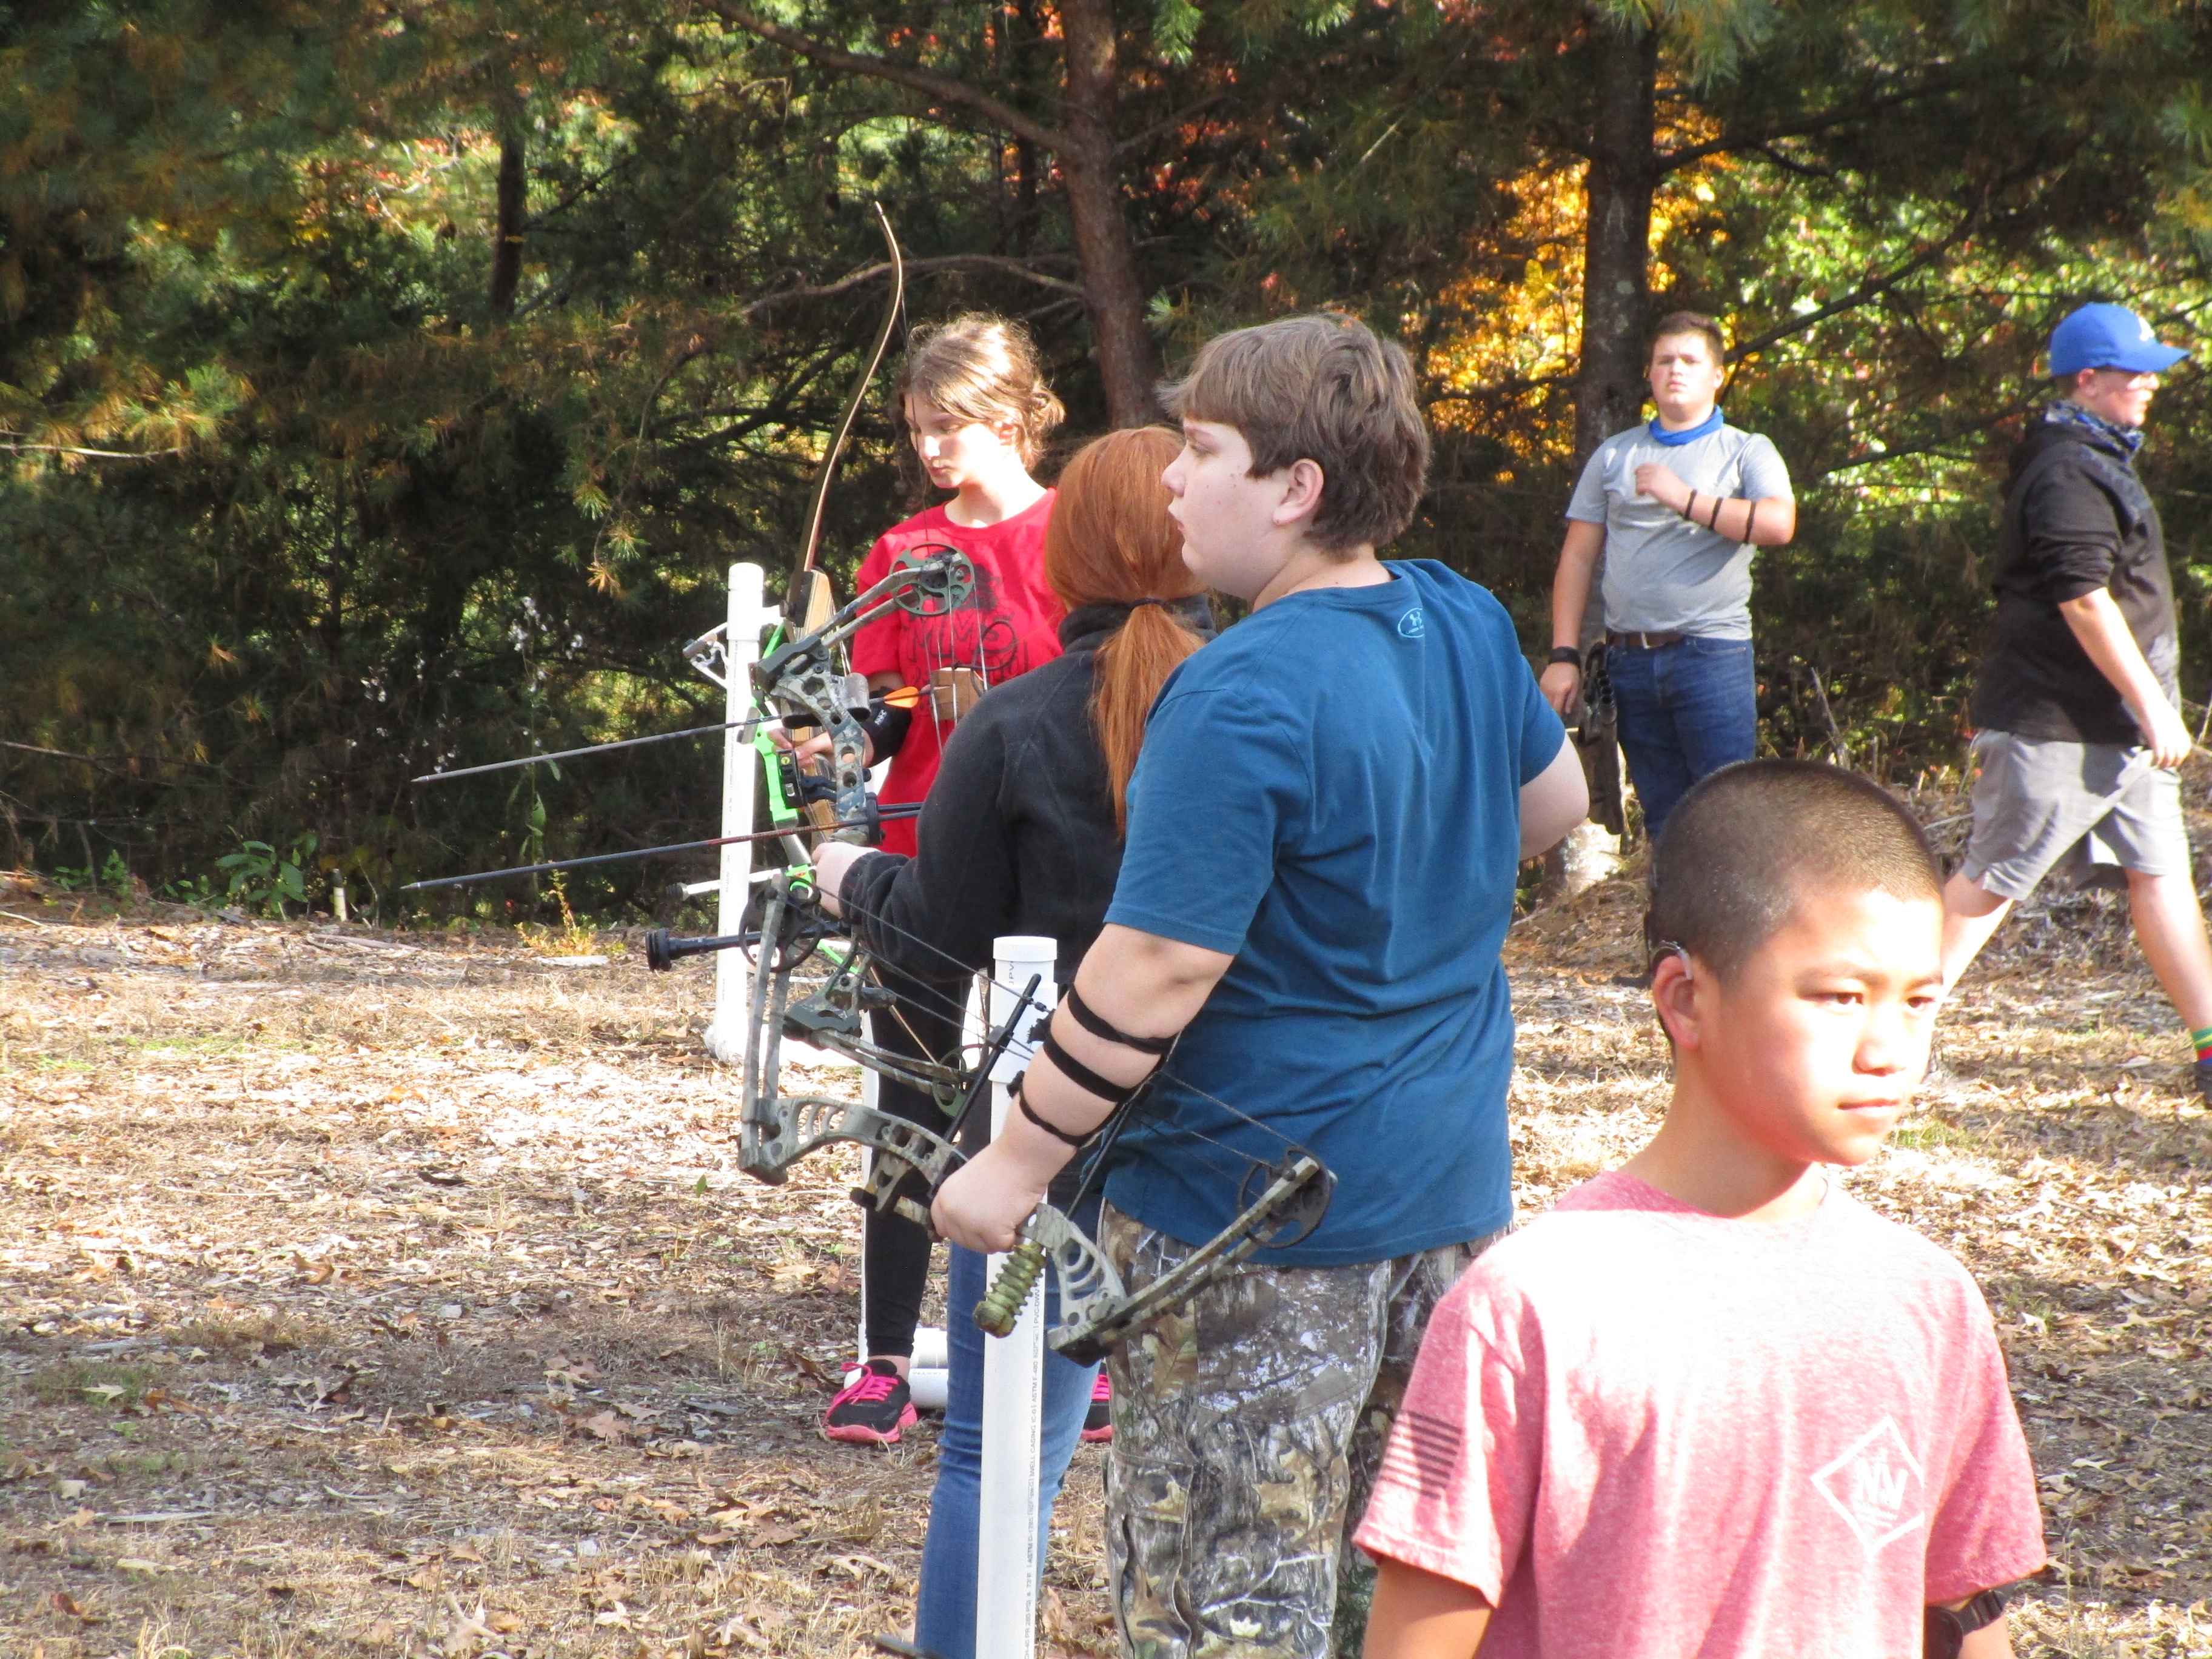 4-H Archery Club Member on the line shooting.